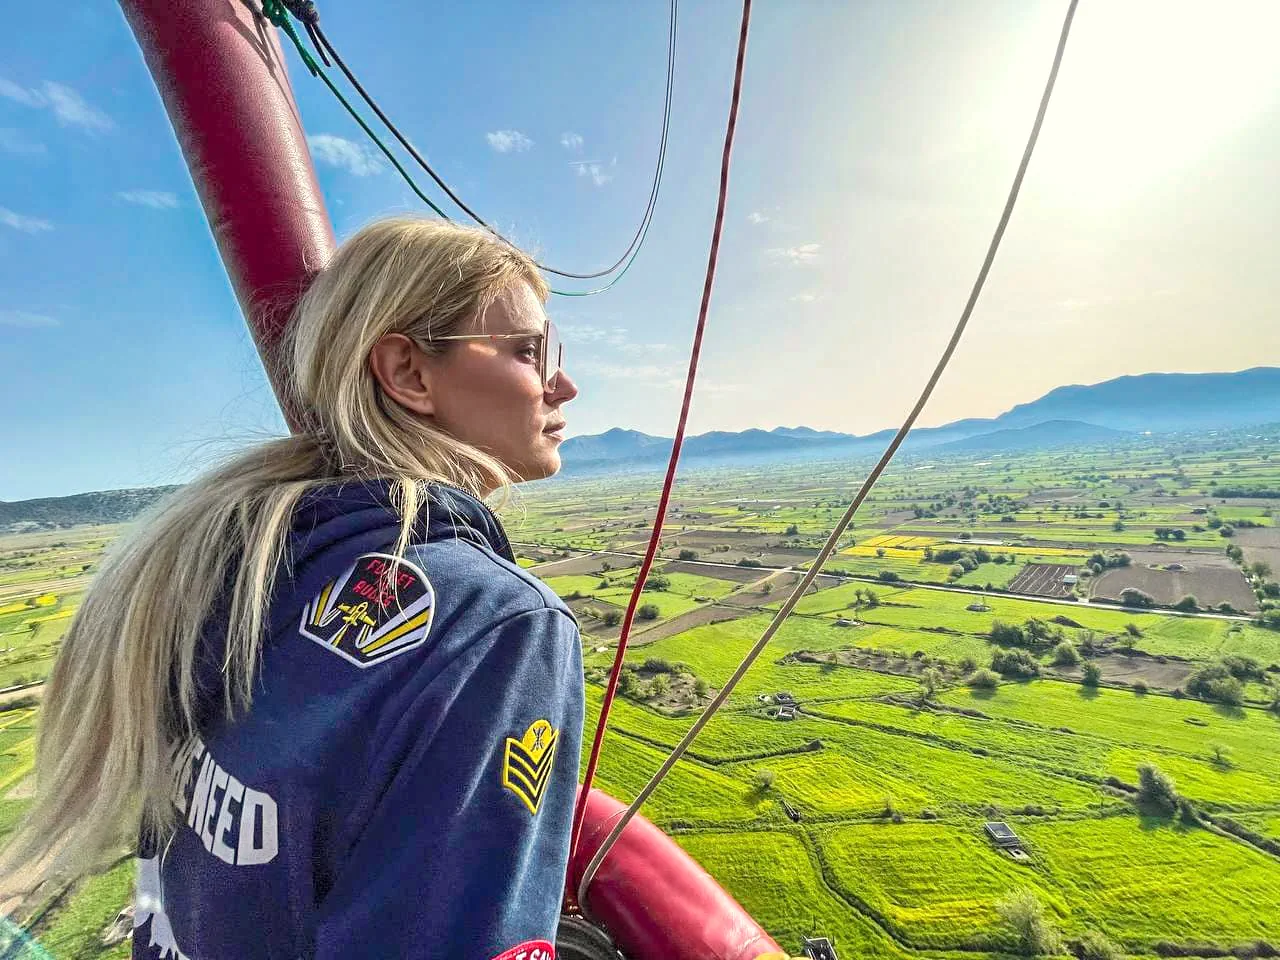 Hot-Air Balloon Flight with Traditional Breakfast